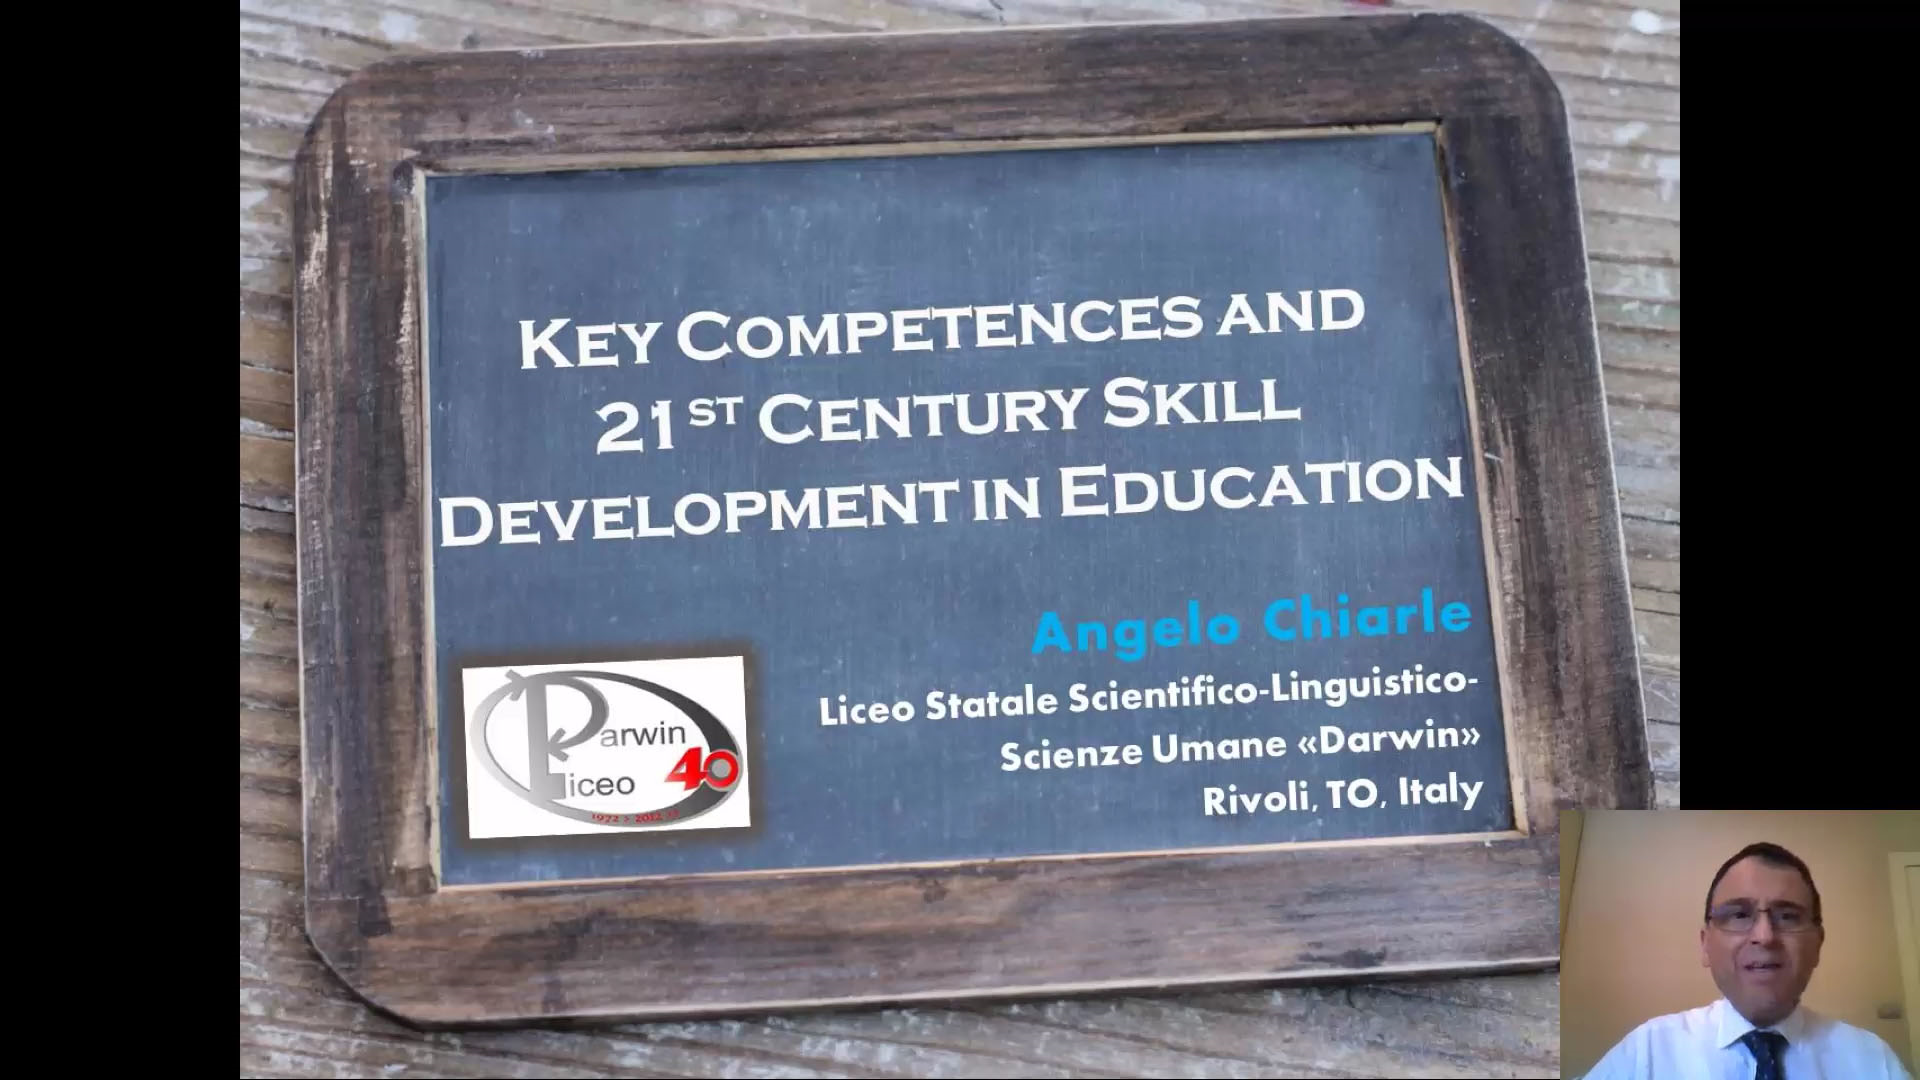 Key Competencies and Contemporary Skill Development in Education